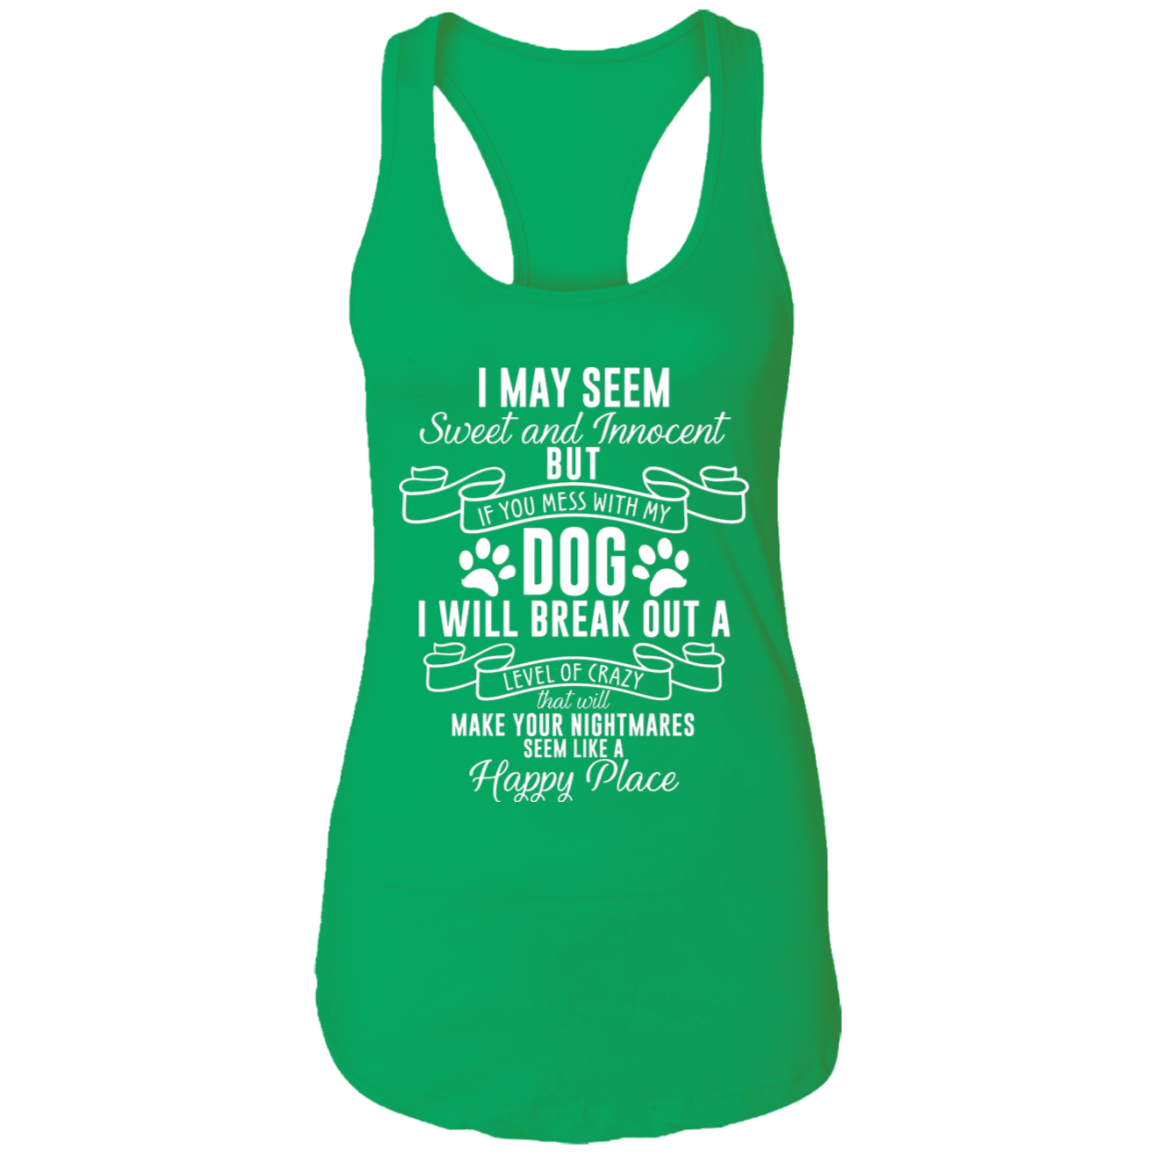 I May Seem Sweet And Innocent - Ladies Racer Back Tank.